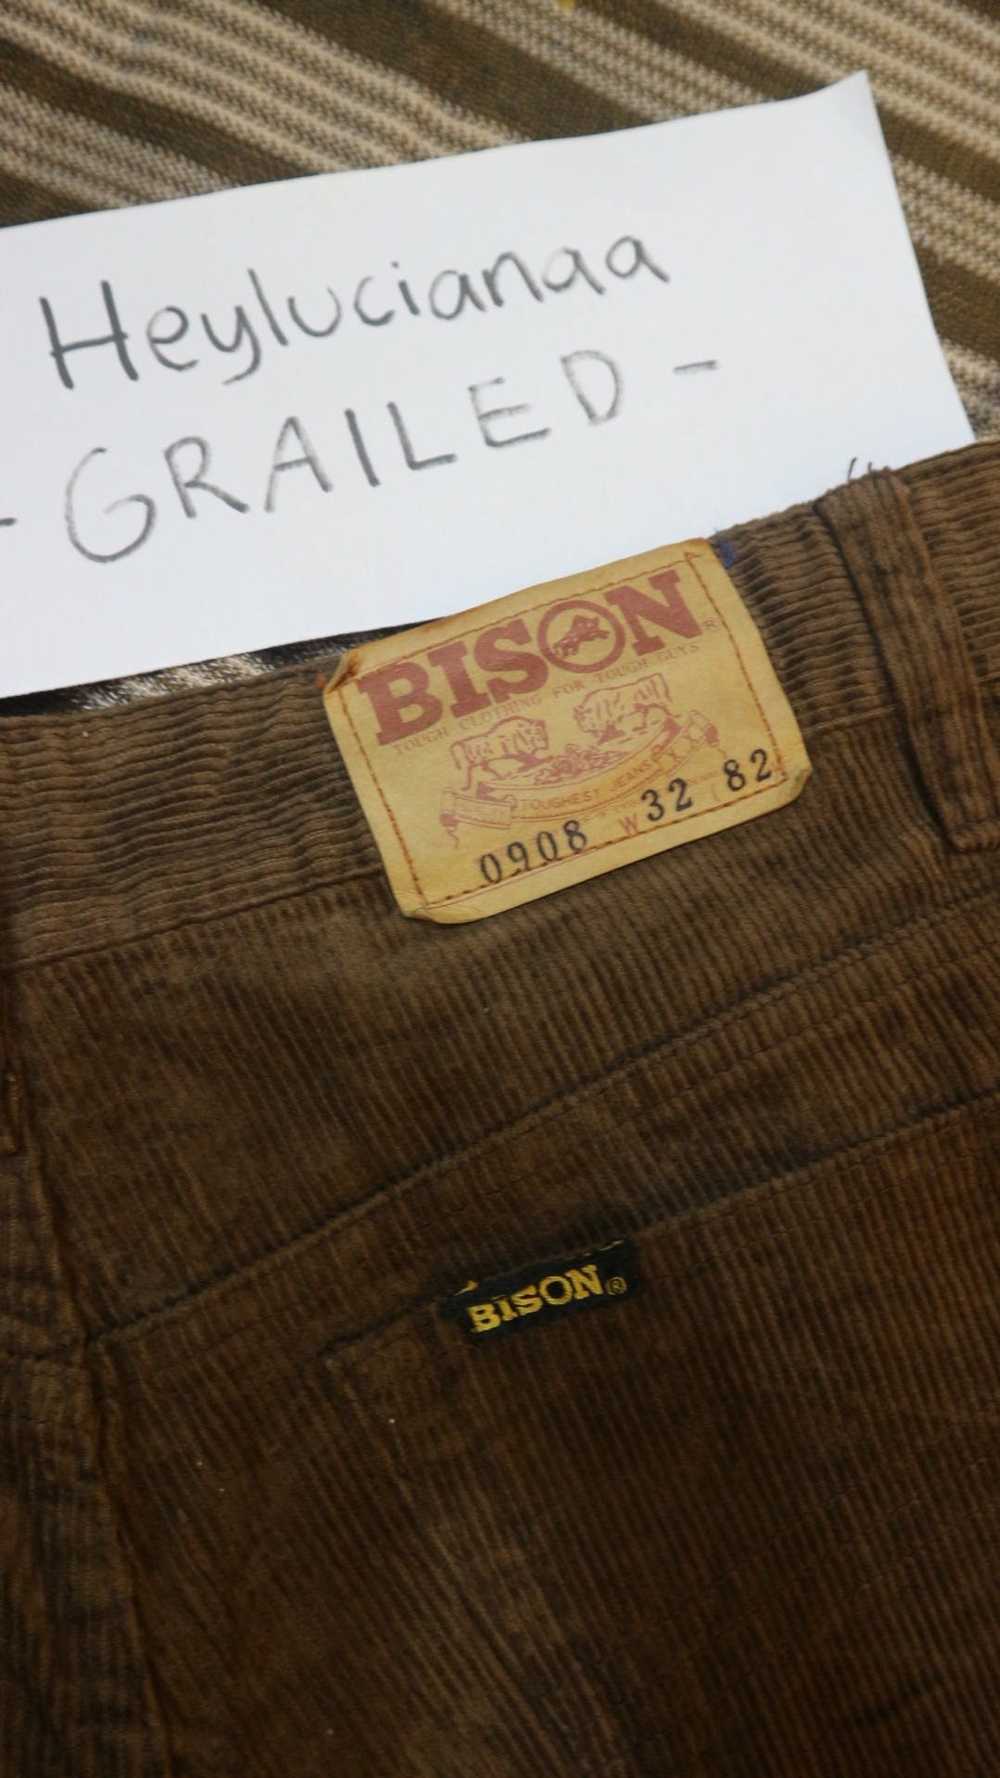 Japanese Brand Corduroy Pant by Bison - image 9